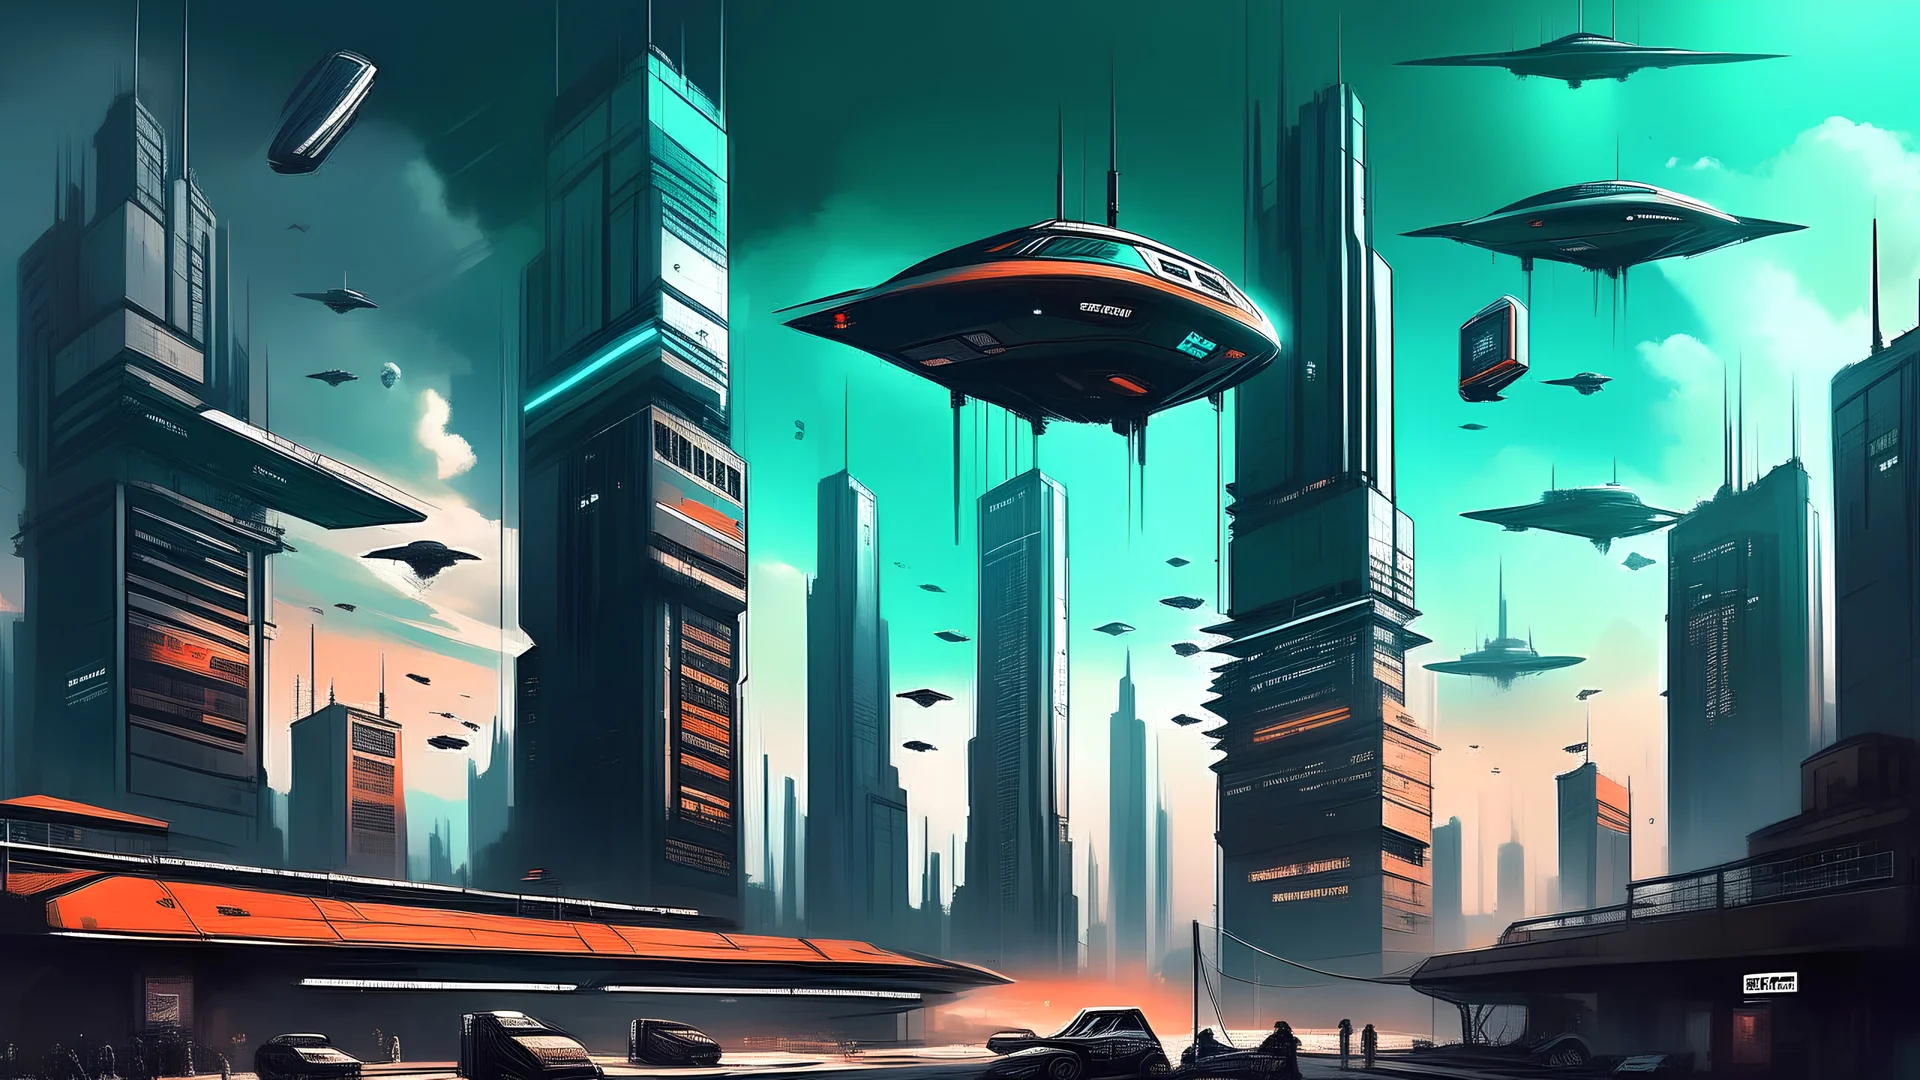 A digital painting depicting a futuristic cityscape with towering buildings and flying cars, where a giant shovel is being used as a vice to hold up a massive antenna